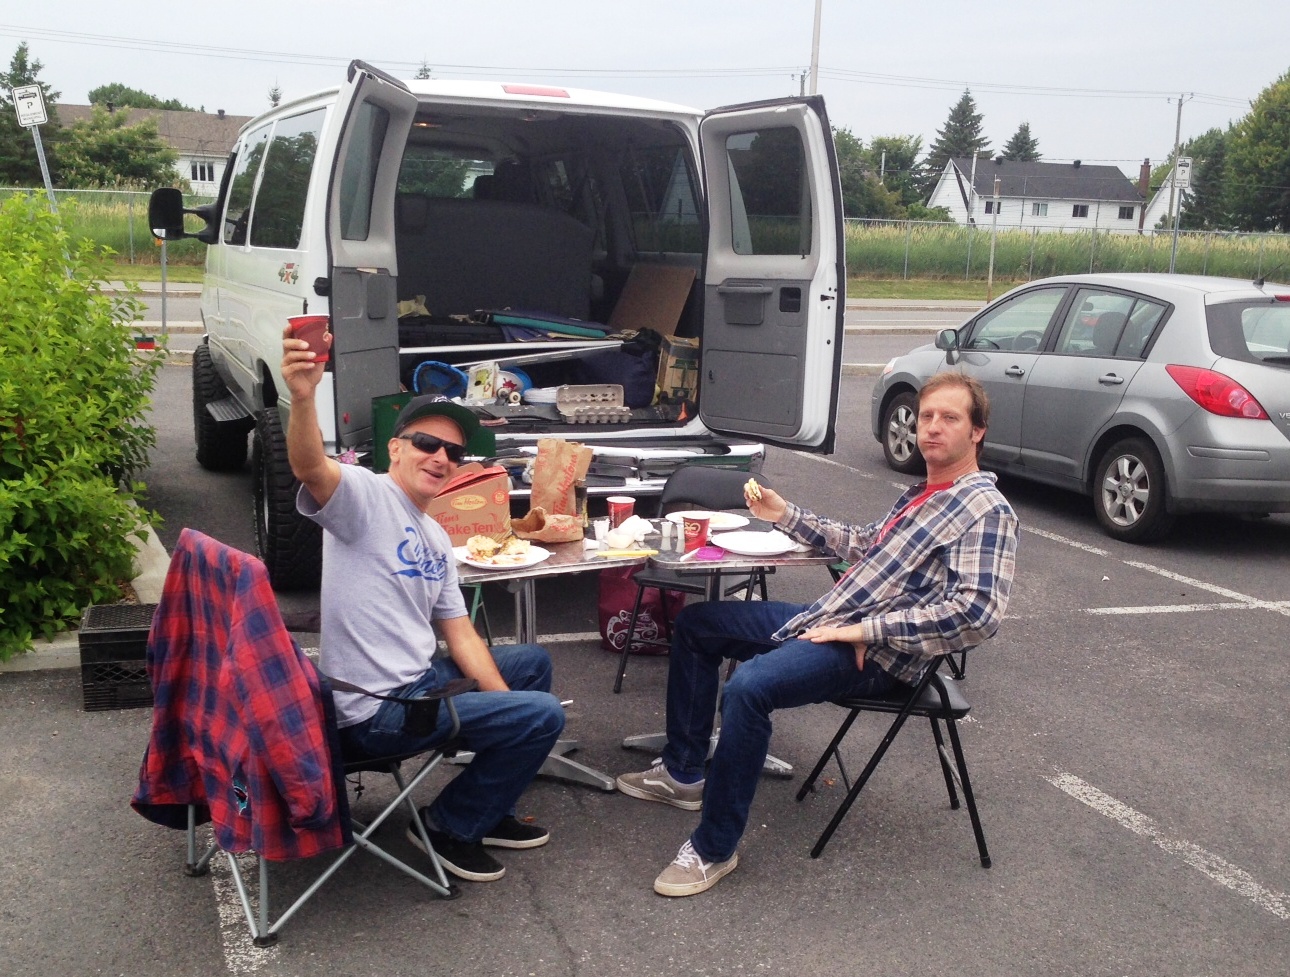 Habs fans set up a breakfast tailgate before Day 1 of Development Camp.